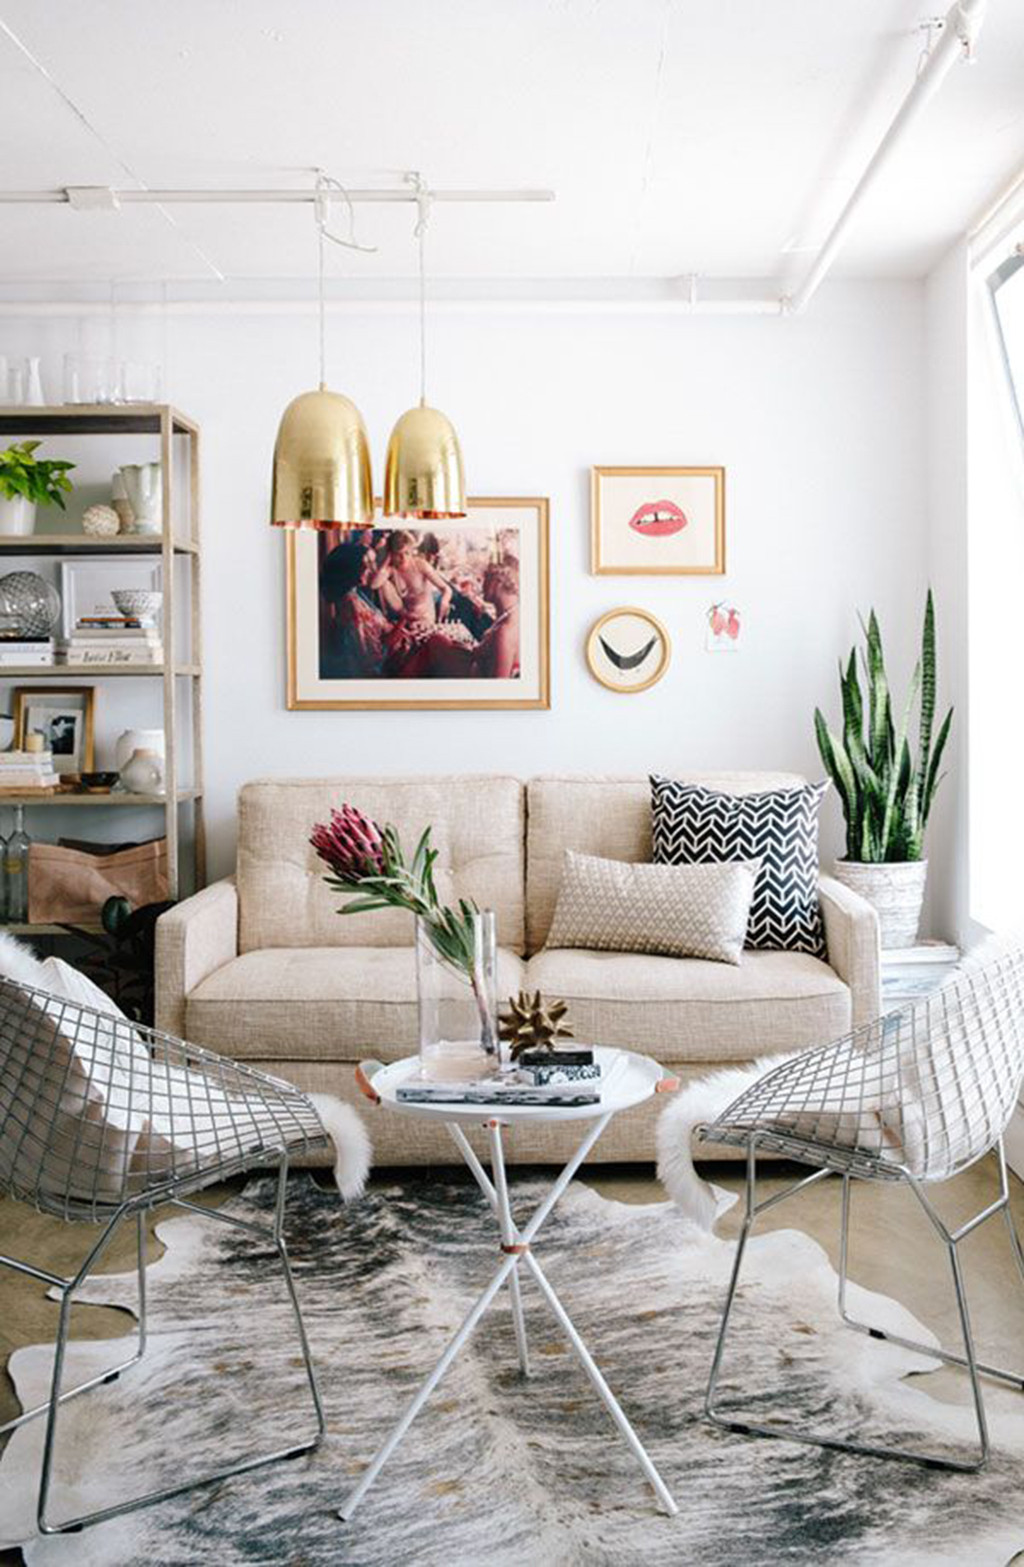 20 Clever Small Living Room Ideas That Will Maximize Your Space